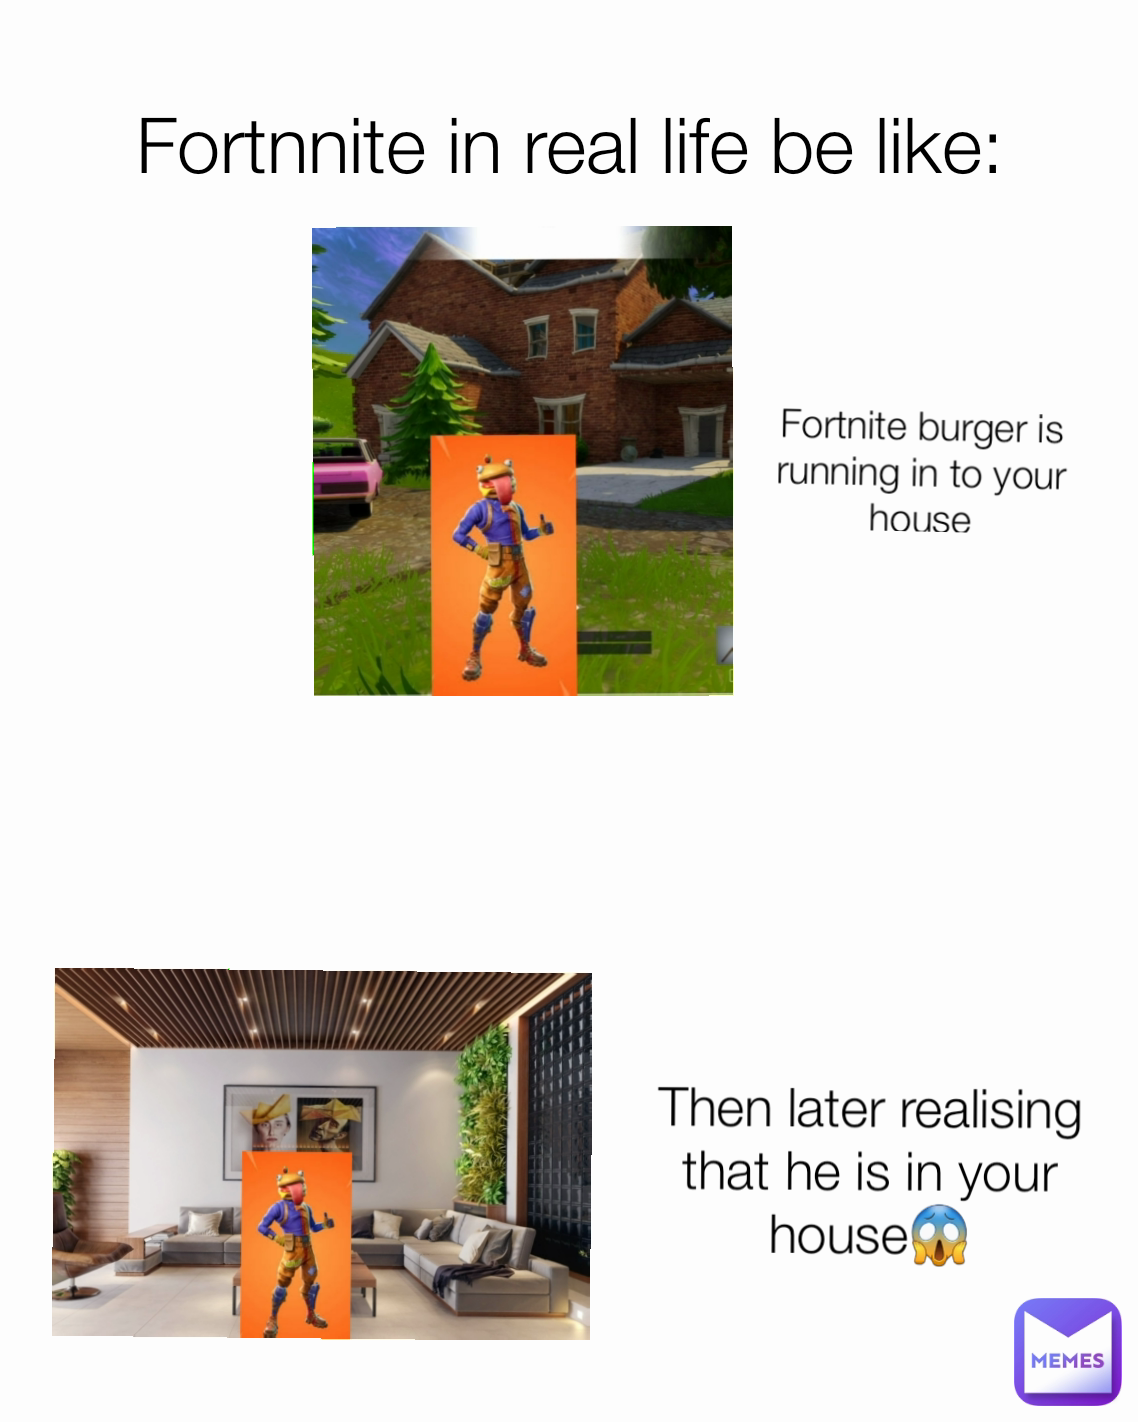 Then later realising that he is in your house😱 Fortnite burger is running in to your house Fortnnite in real life be like: